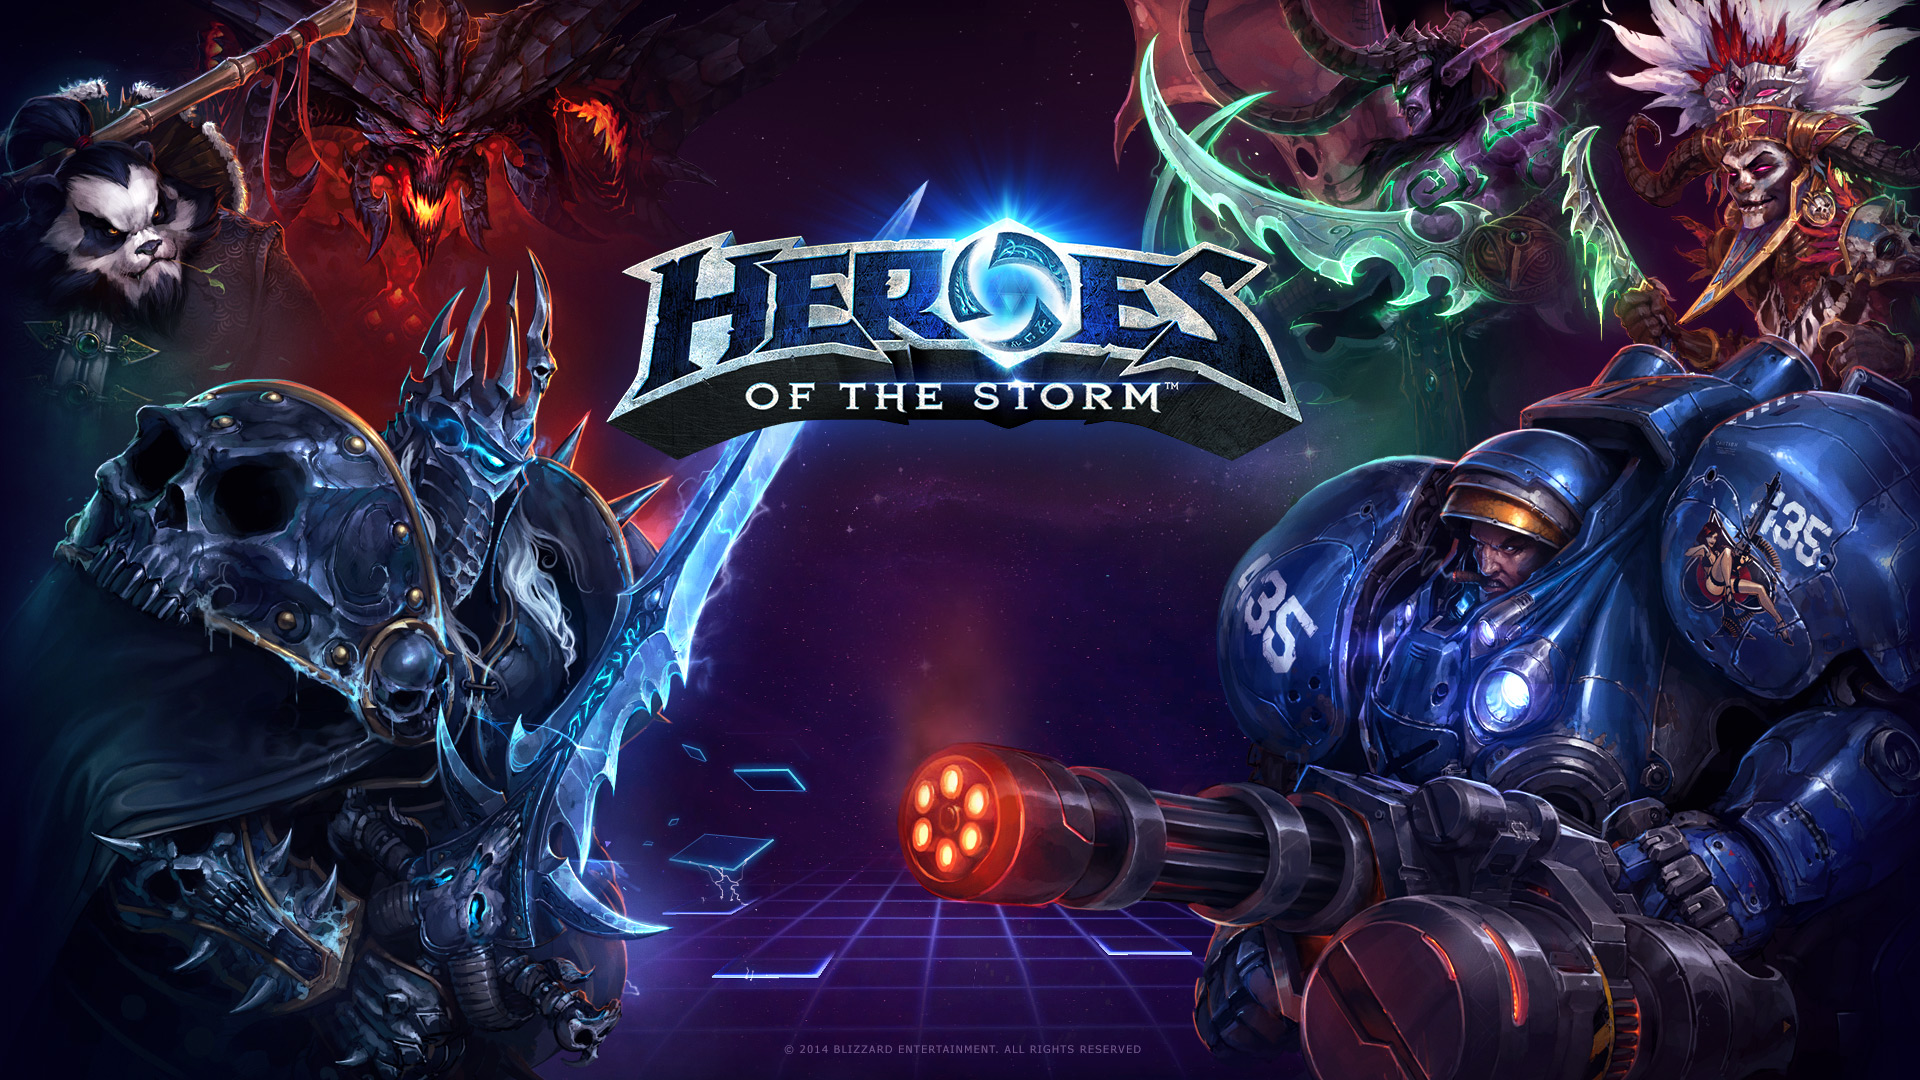 Heroes of the Storm Info and Impressions